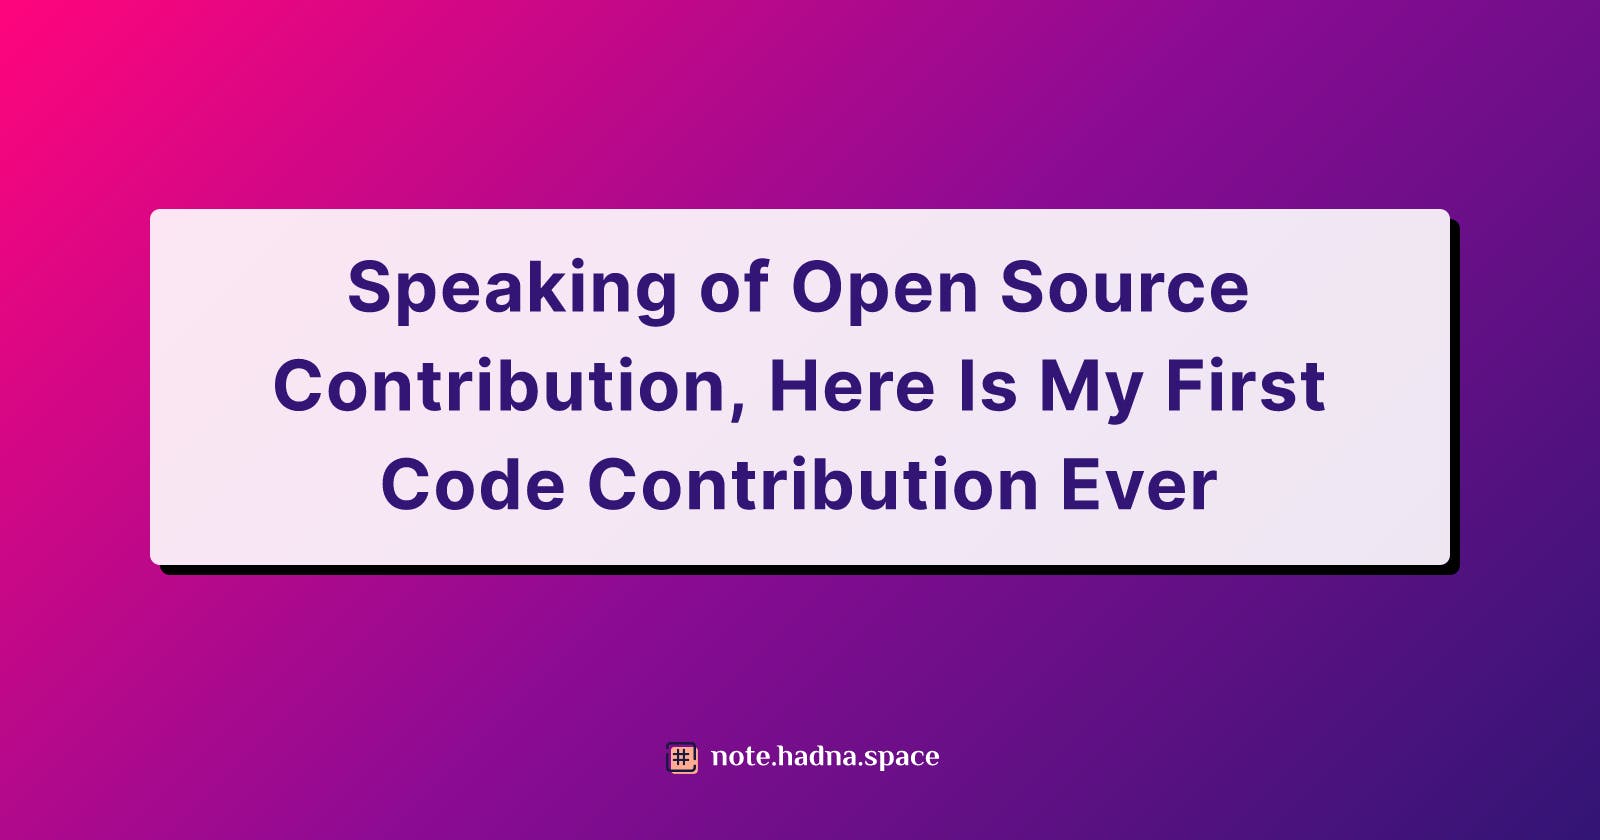 Speaking of Open Source Contribution, Here Is My First Code Contribution Ever